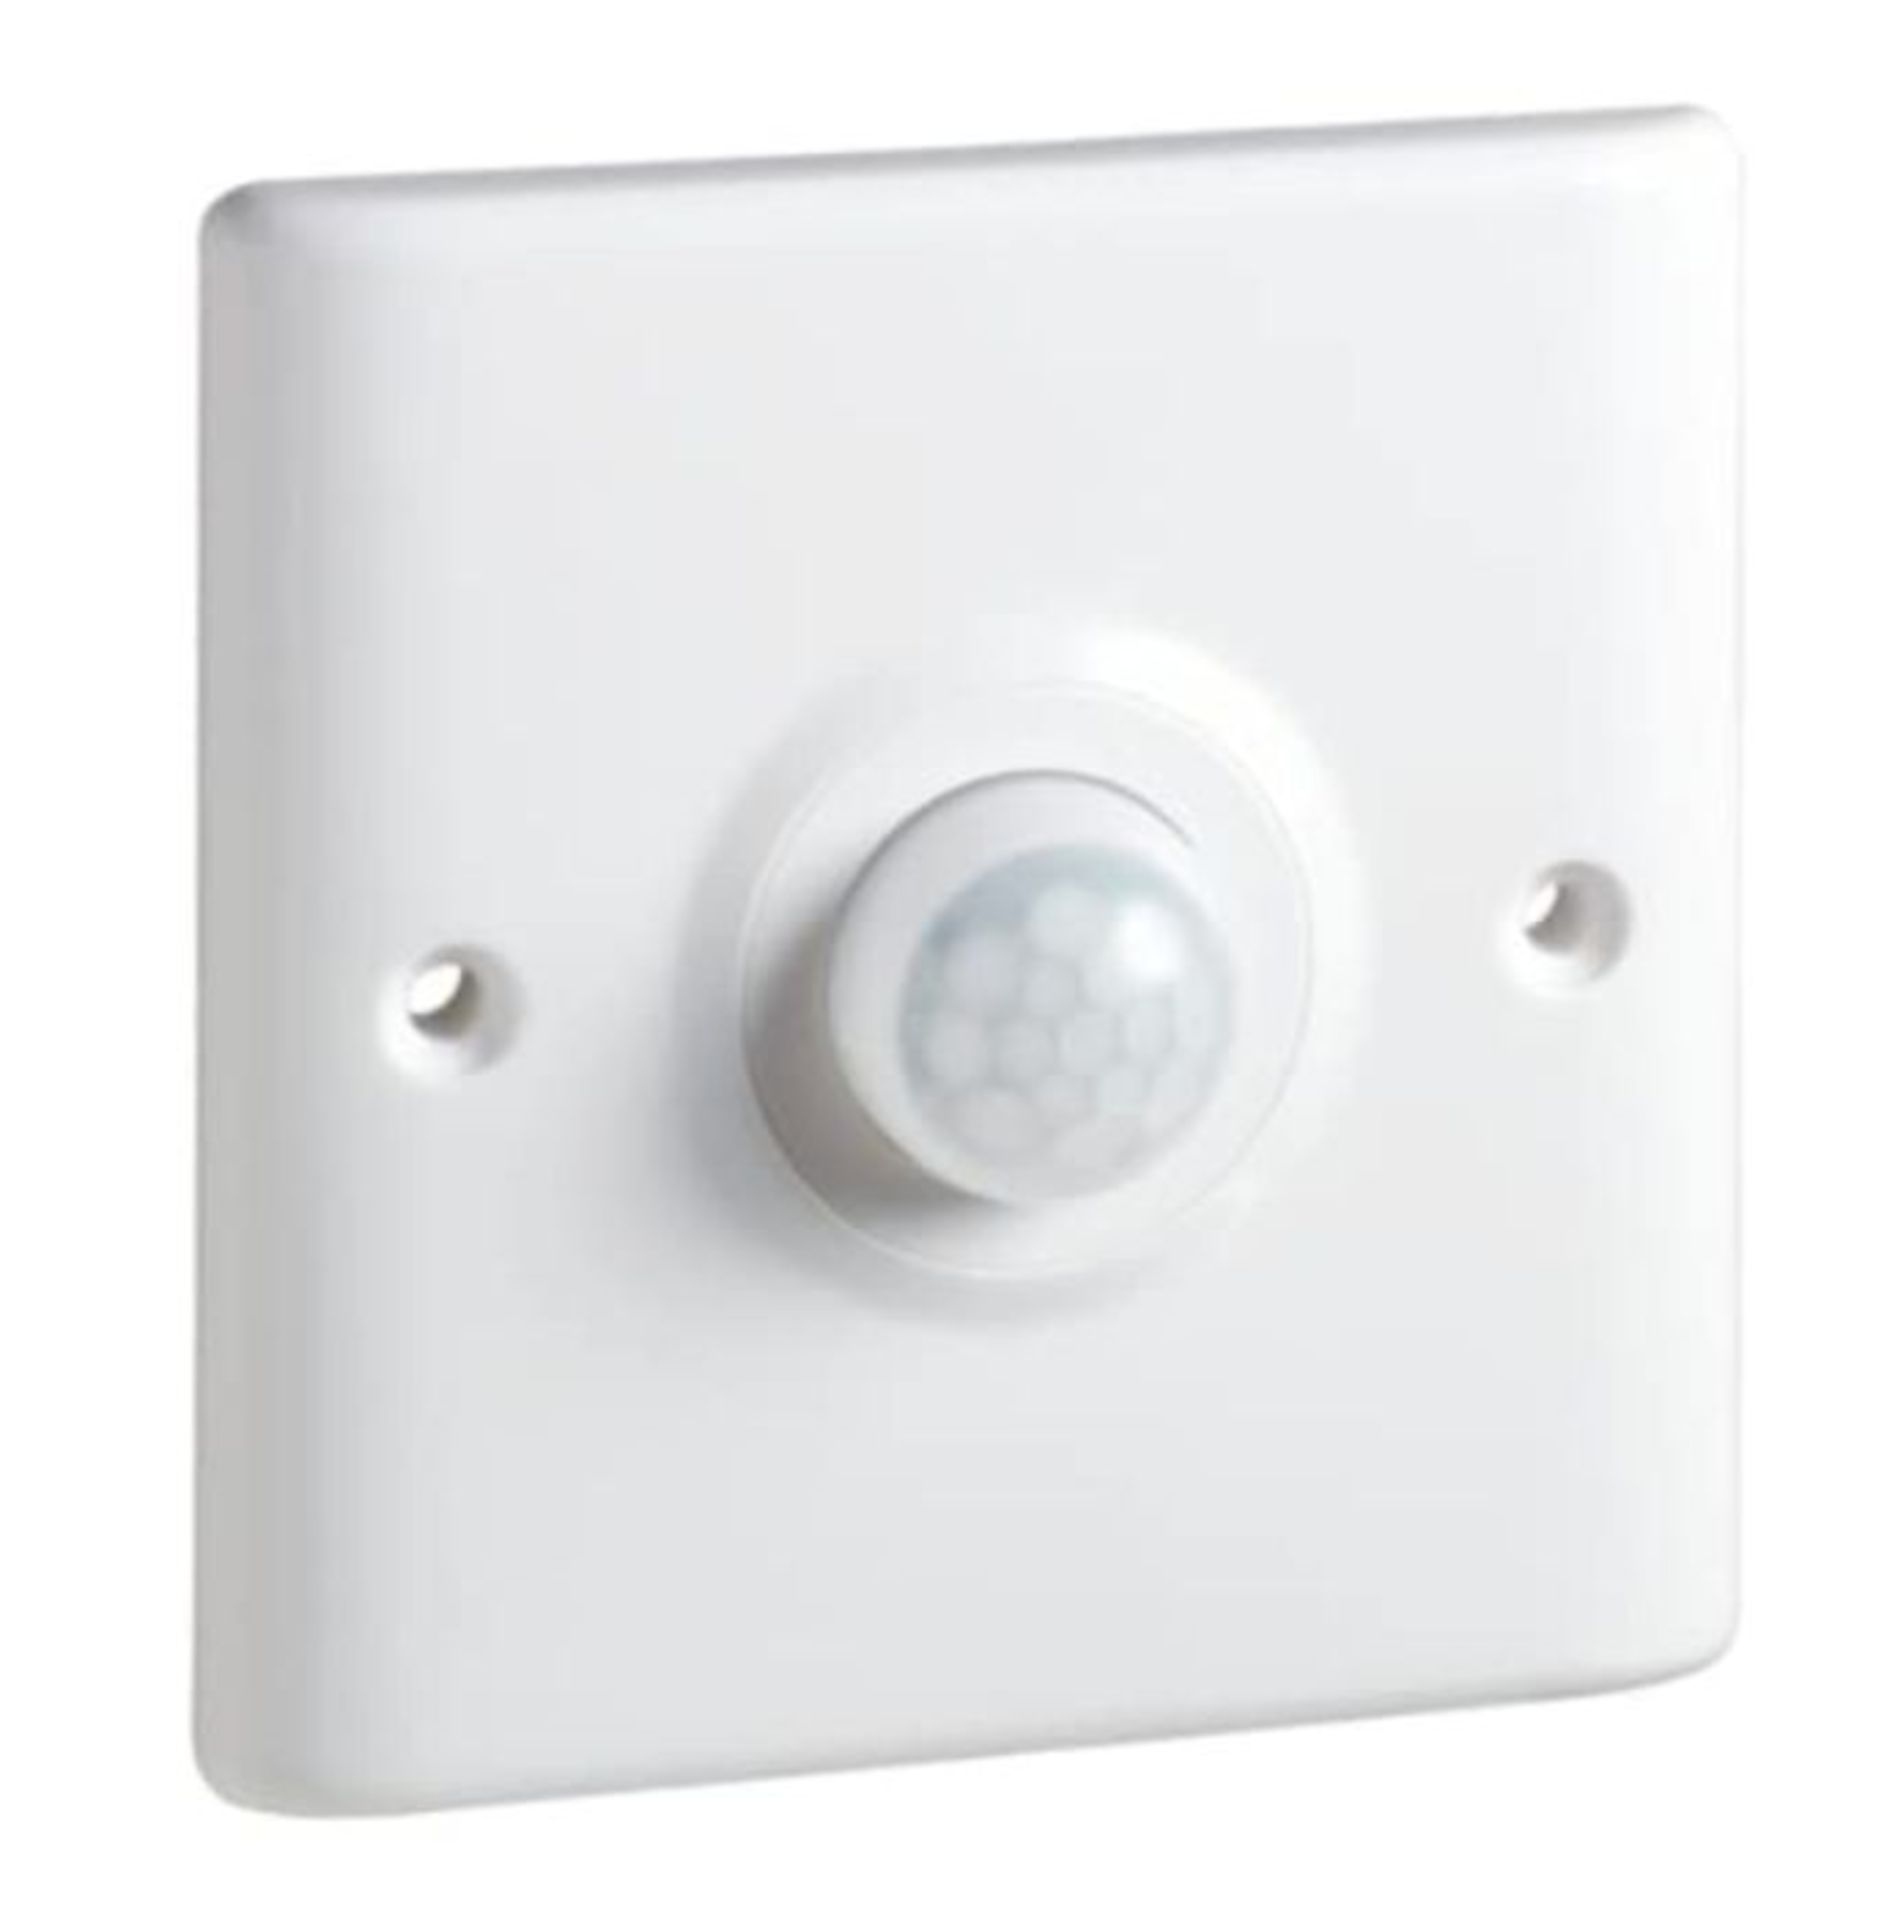 RRP £59.00 Elkay Columbus PIR Sensor with Timer and lux Adjustment, ABS, White, Standard Switch S